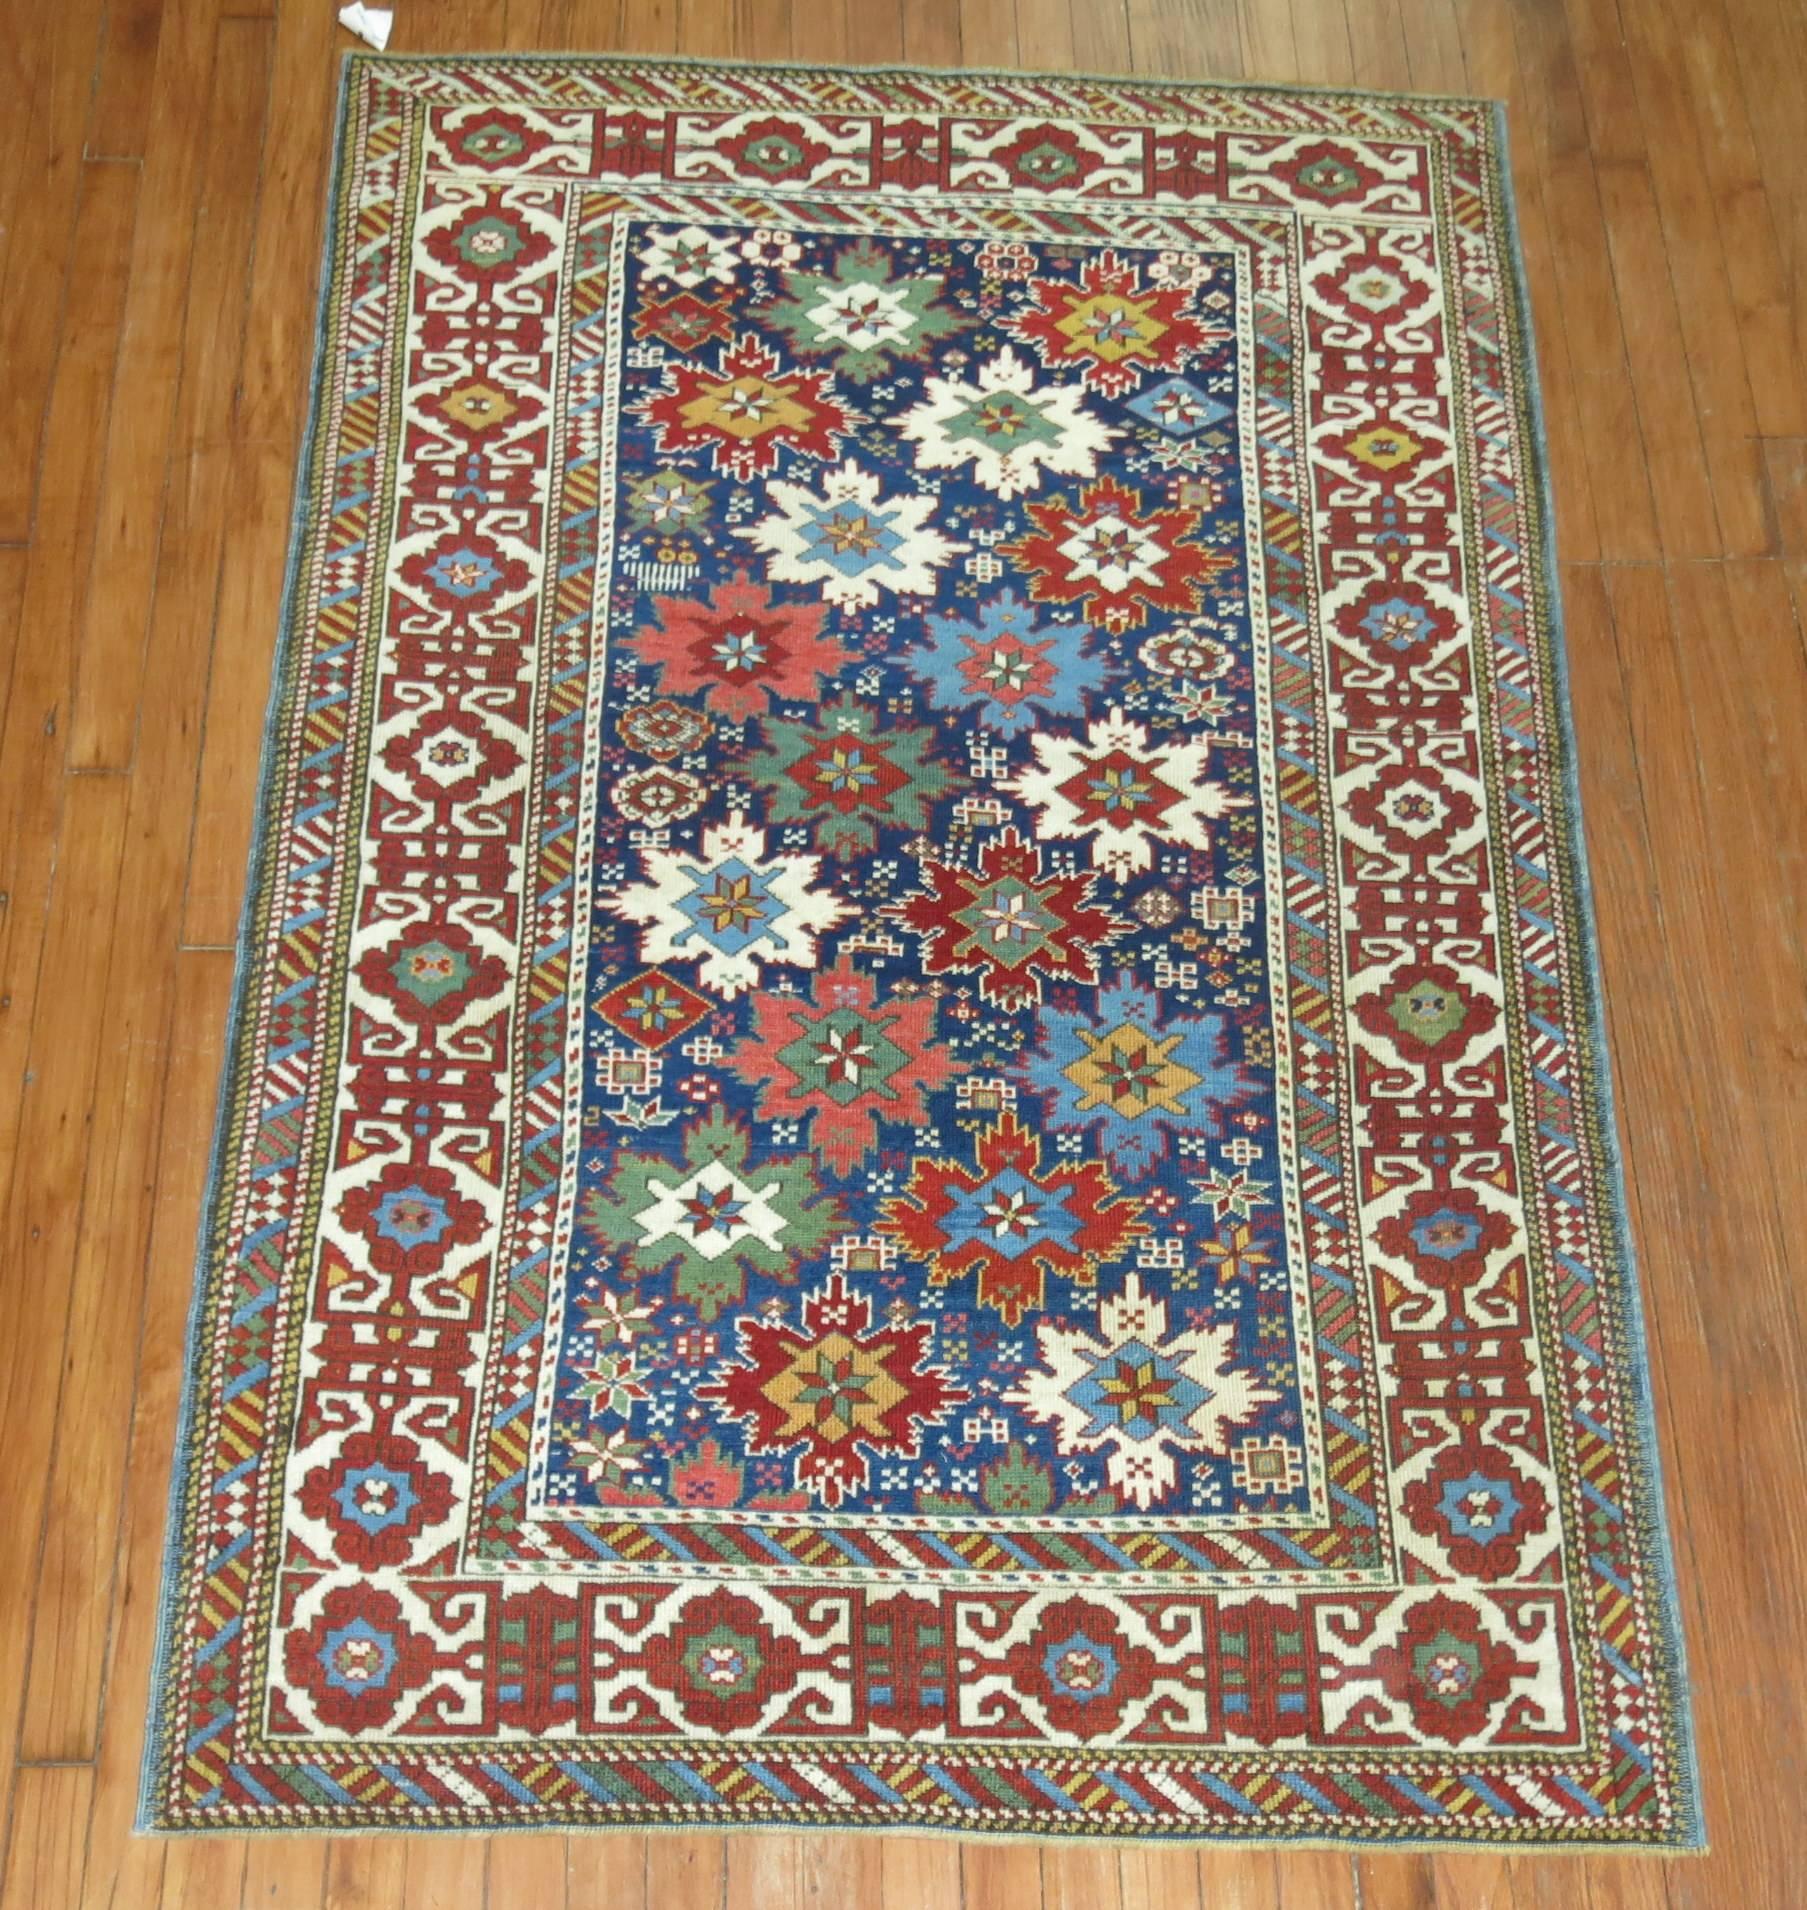 19th century Caucasian Shirvan rug with a 